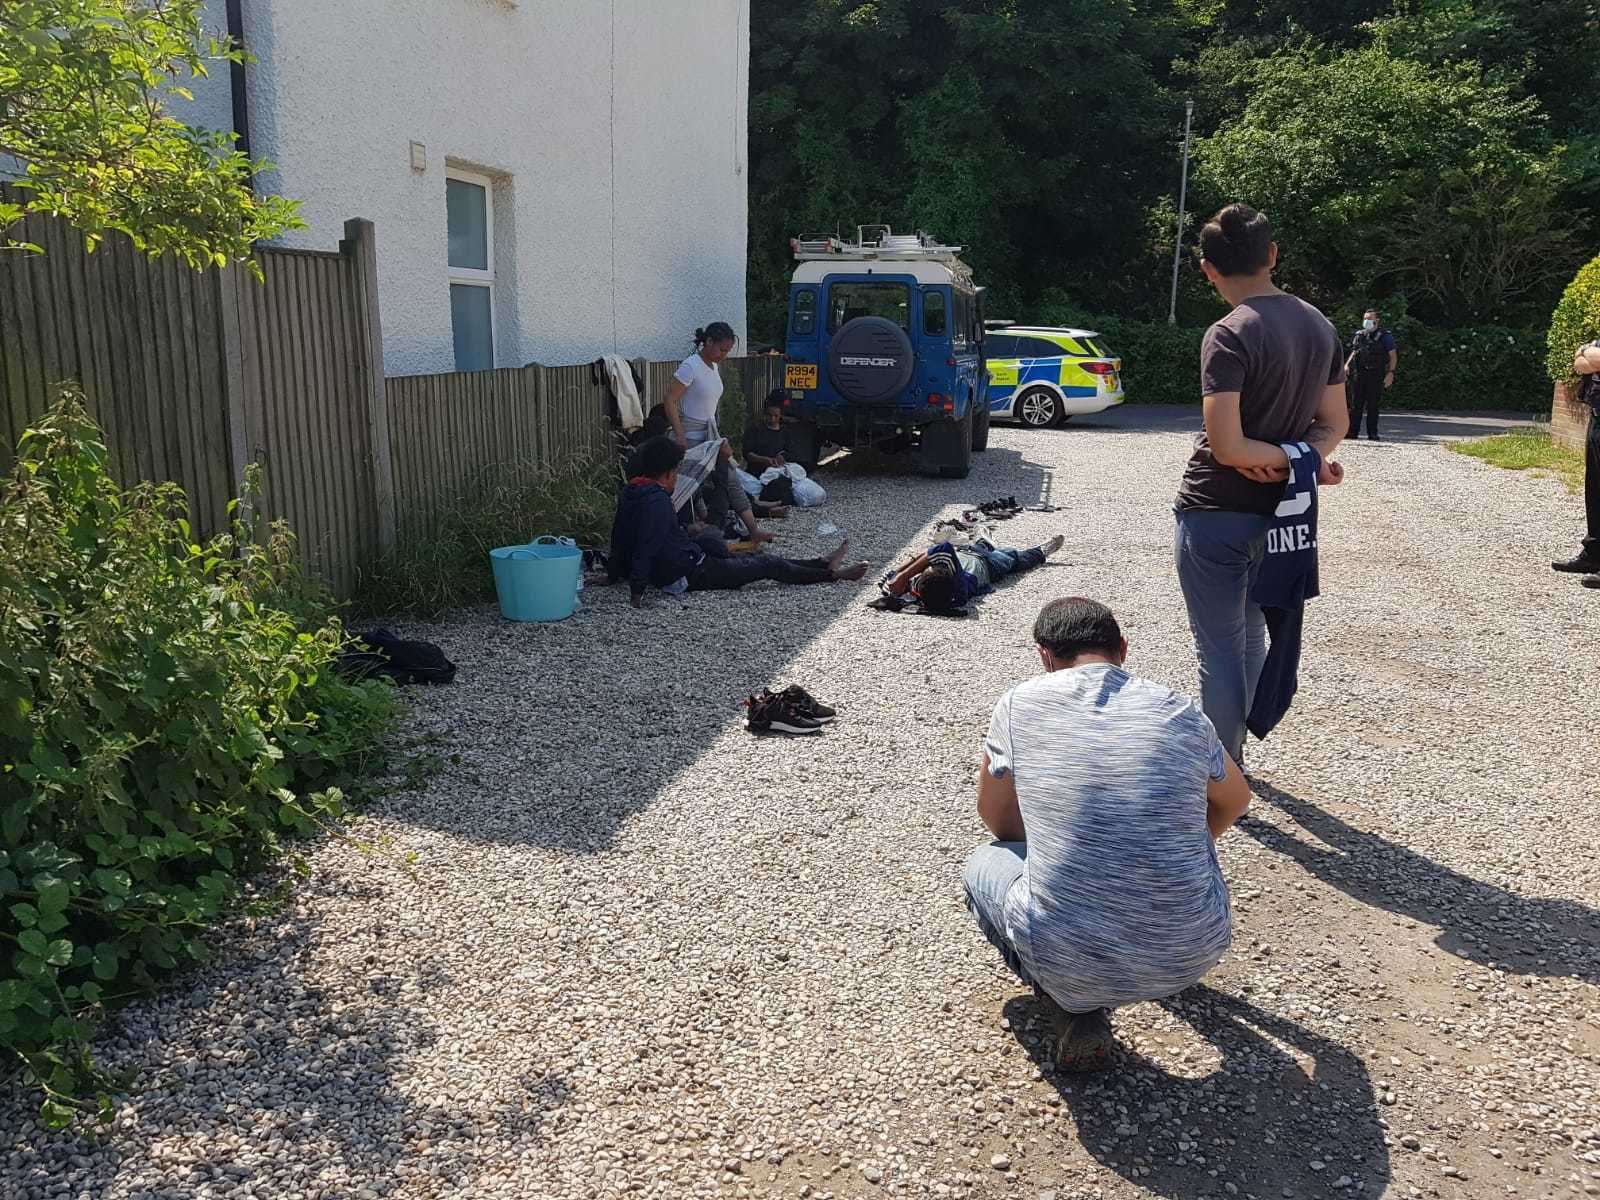 Police caught up wit the migrants at North Road, Kingsdown. Picture: Kathryn Hewitt